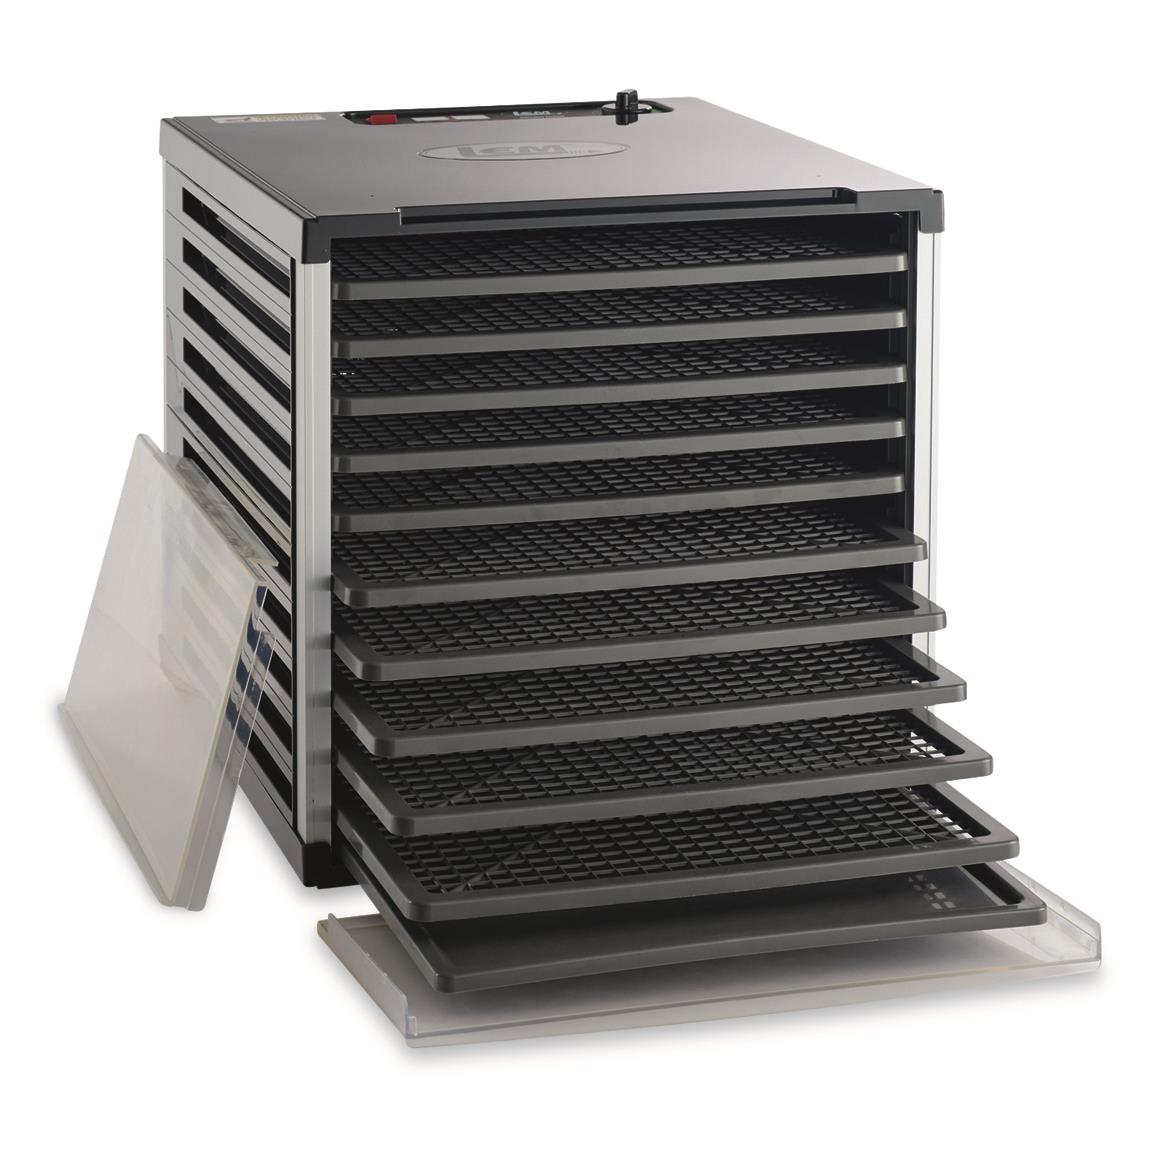 Chard 8-Tray Stainless Steel Dehydrator